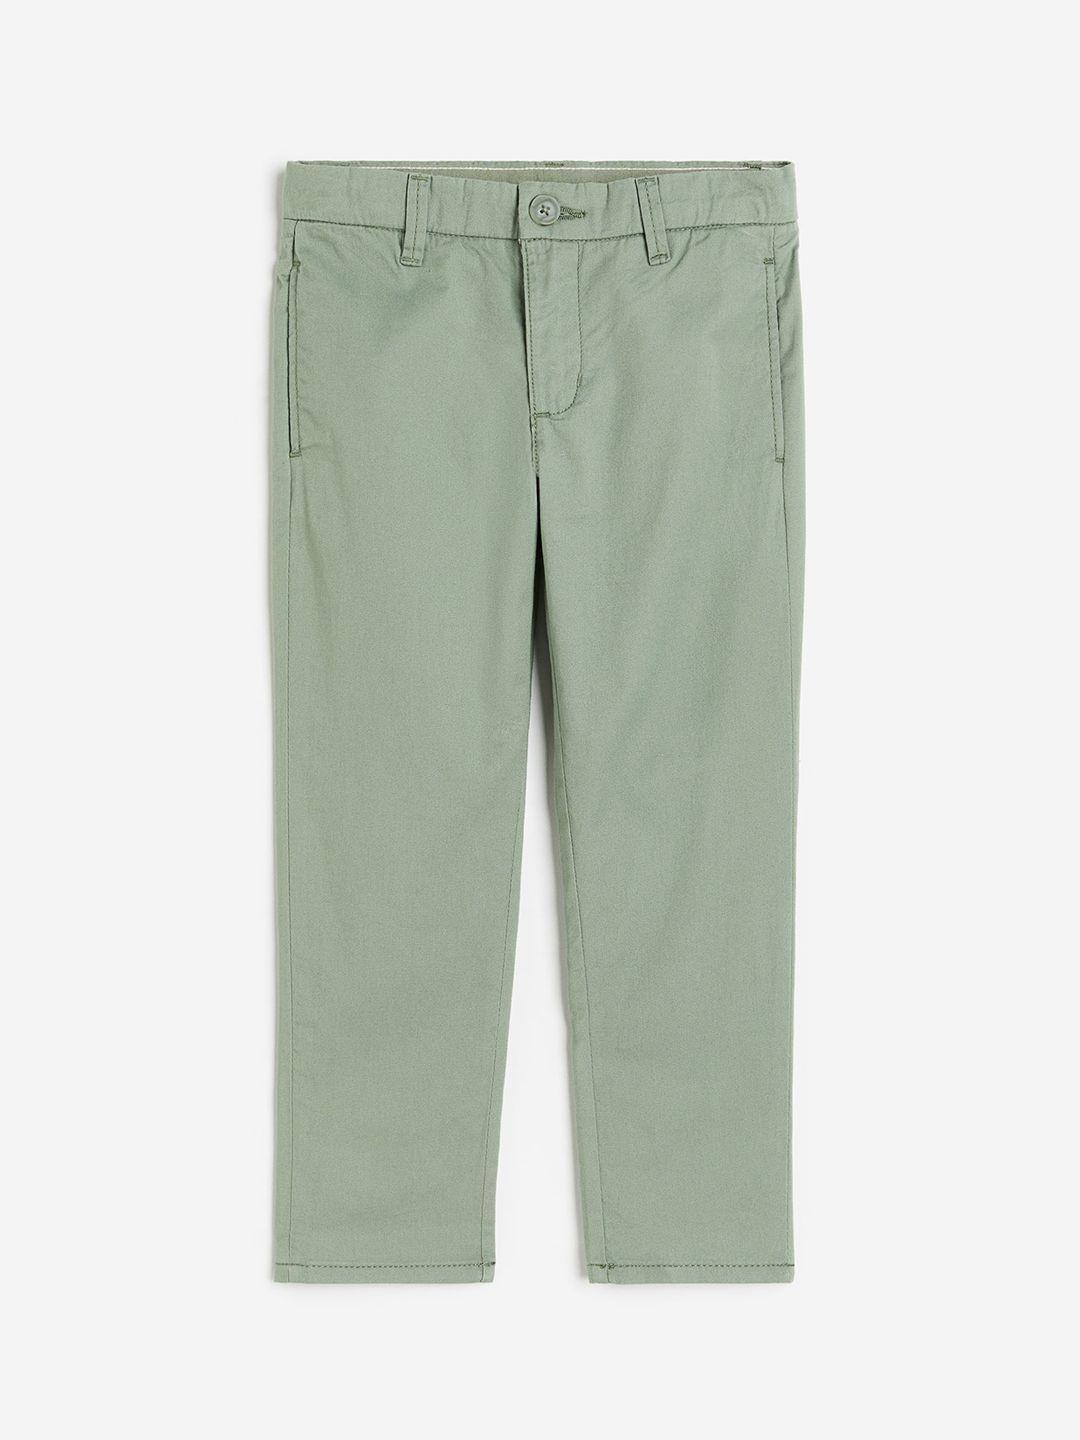 h&m boys twill chinos trousers